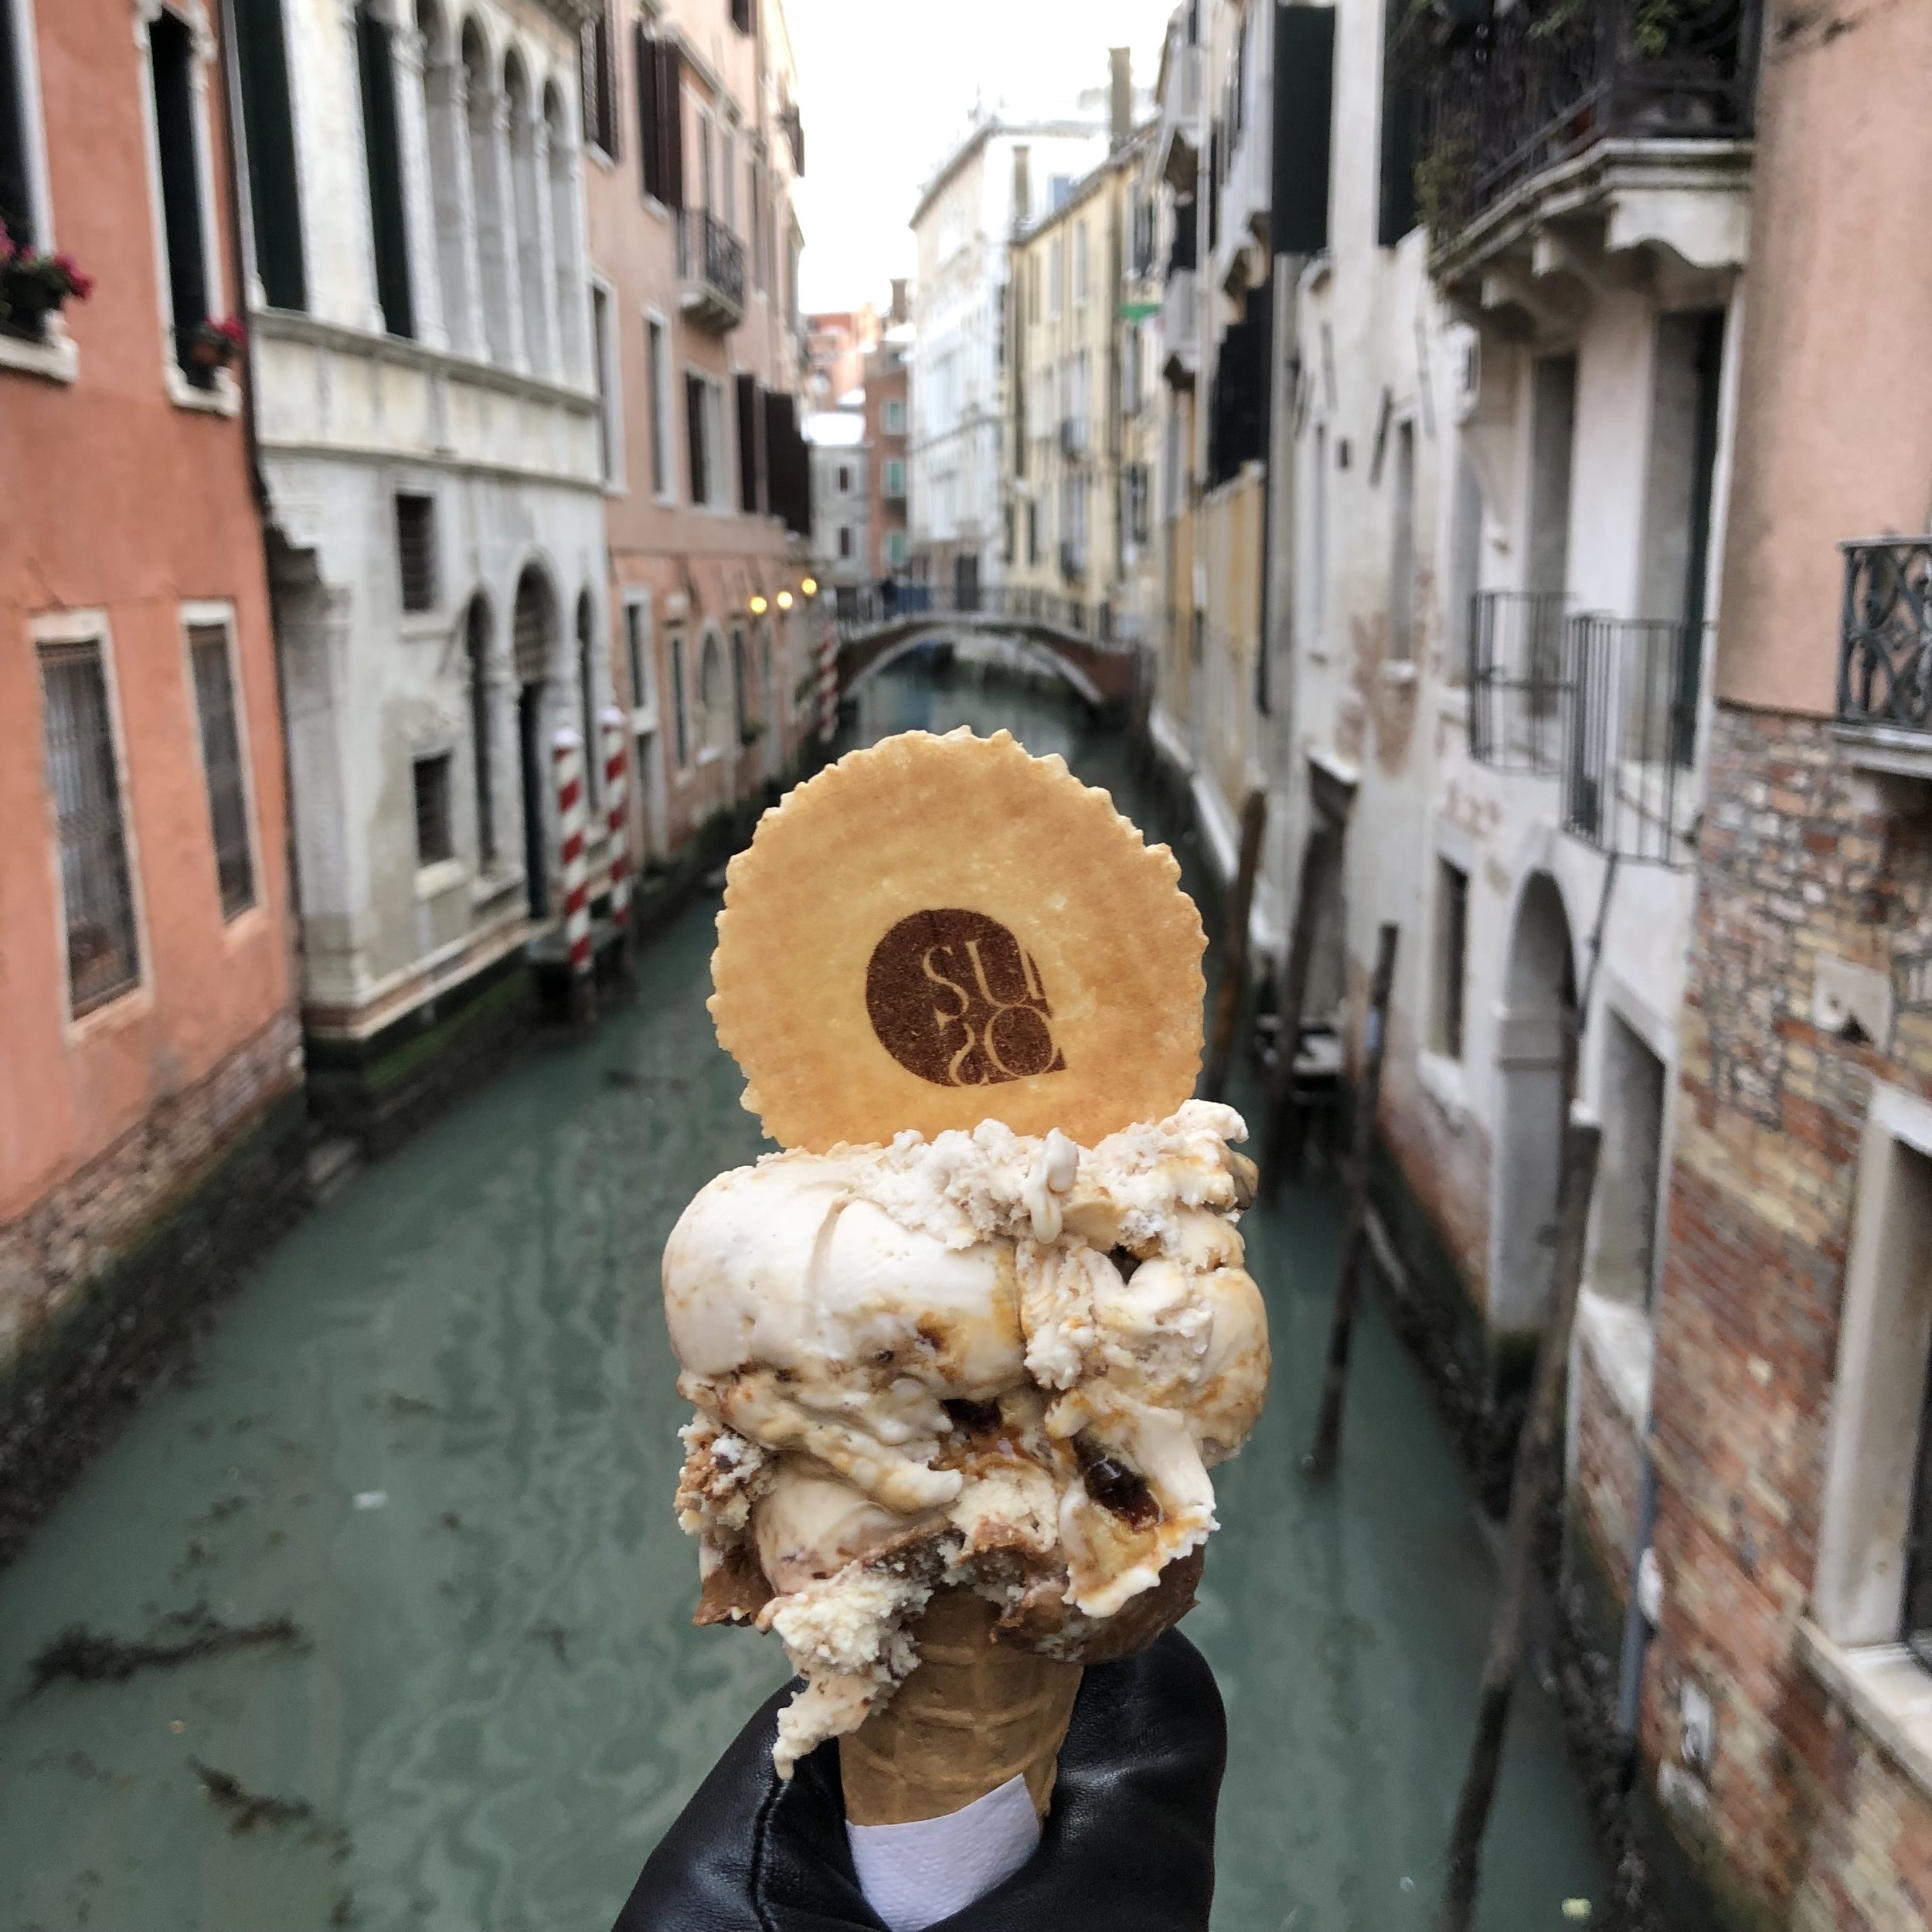 Gelato in Venice, Italy. Canals in the background